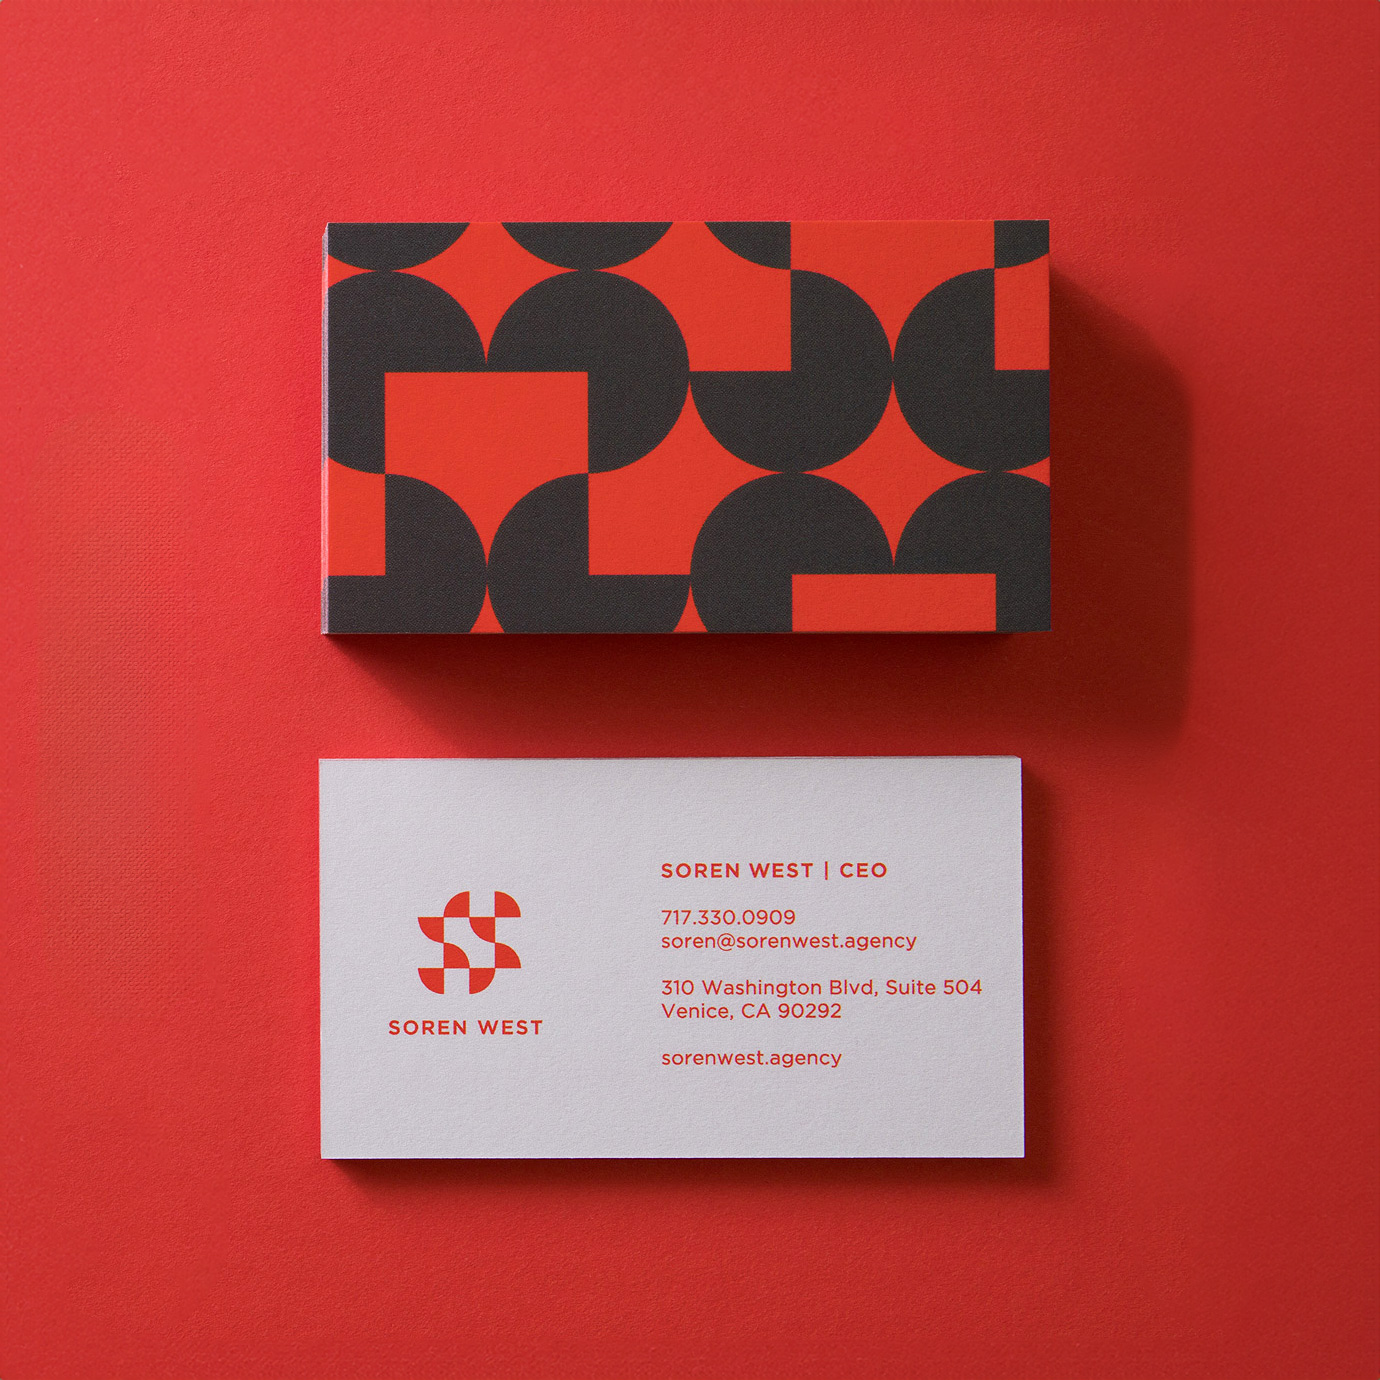 soren west business card front and back on red backdrop